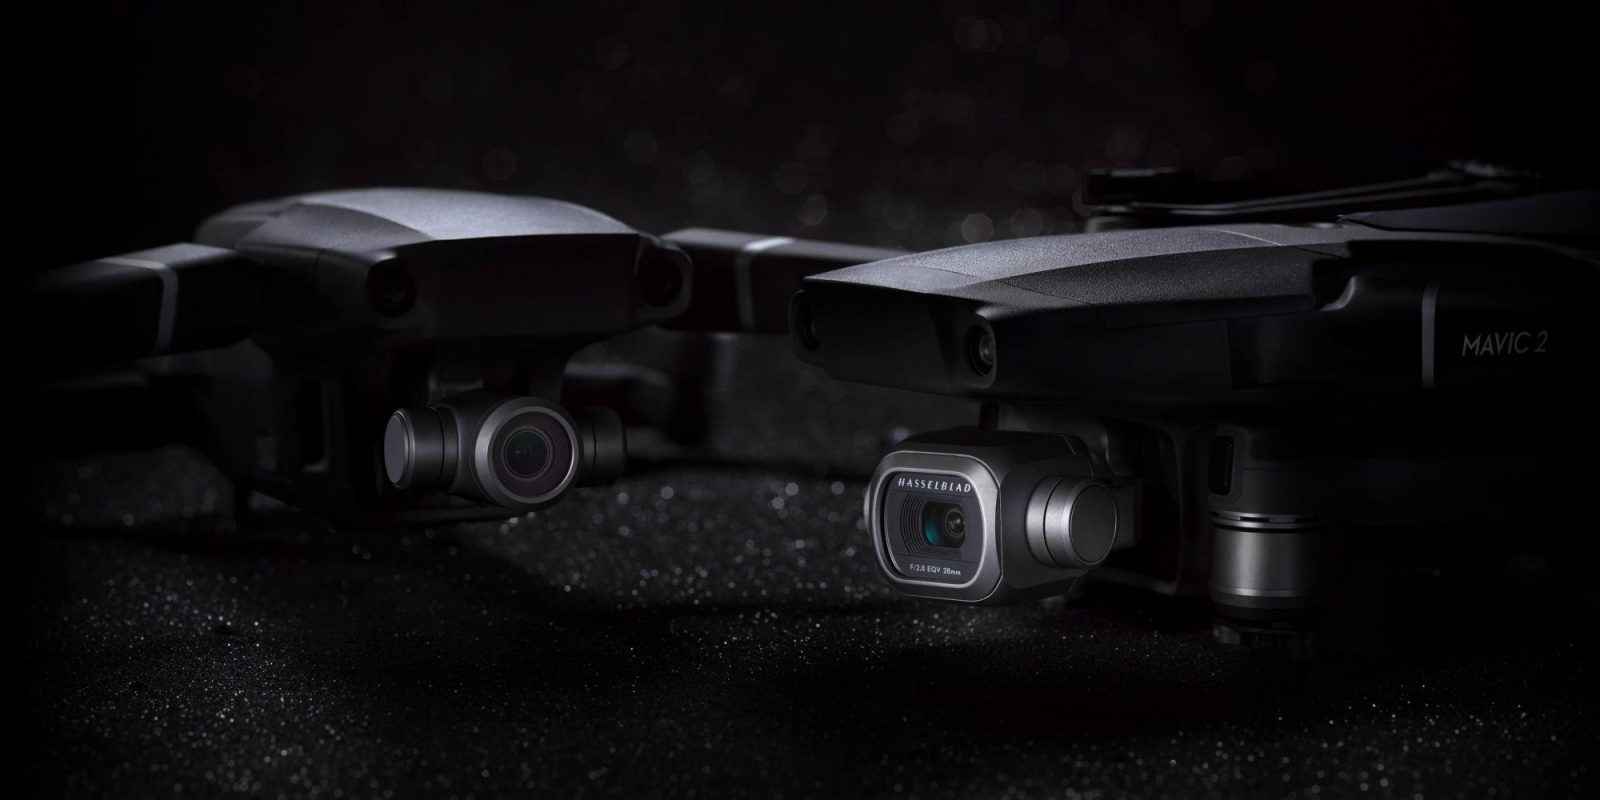 DJI Spring Sales Promotion - Discounts on DJI Mavic 2 Pro, Zoom and more